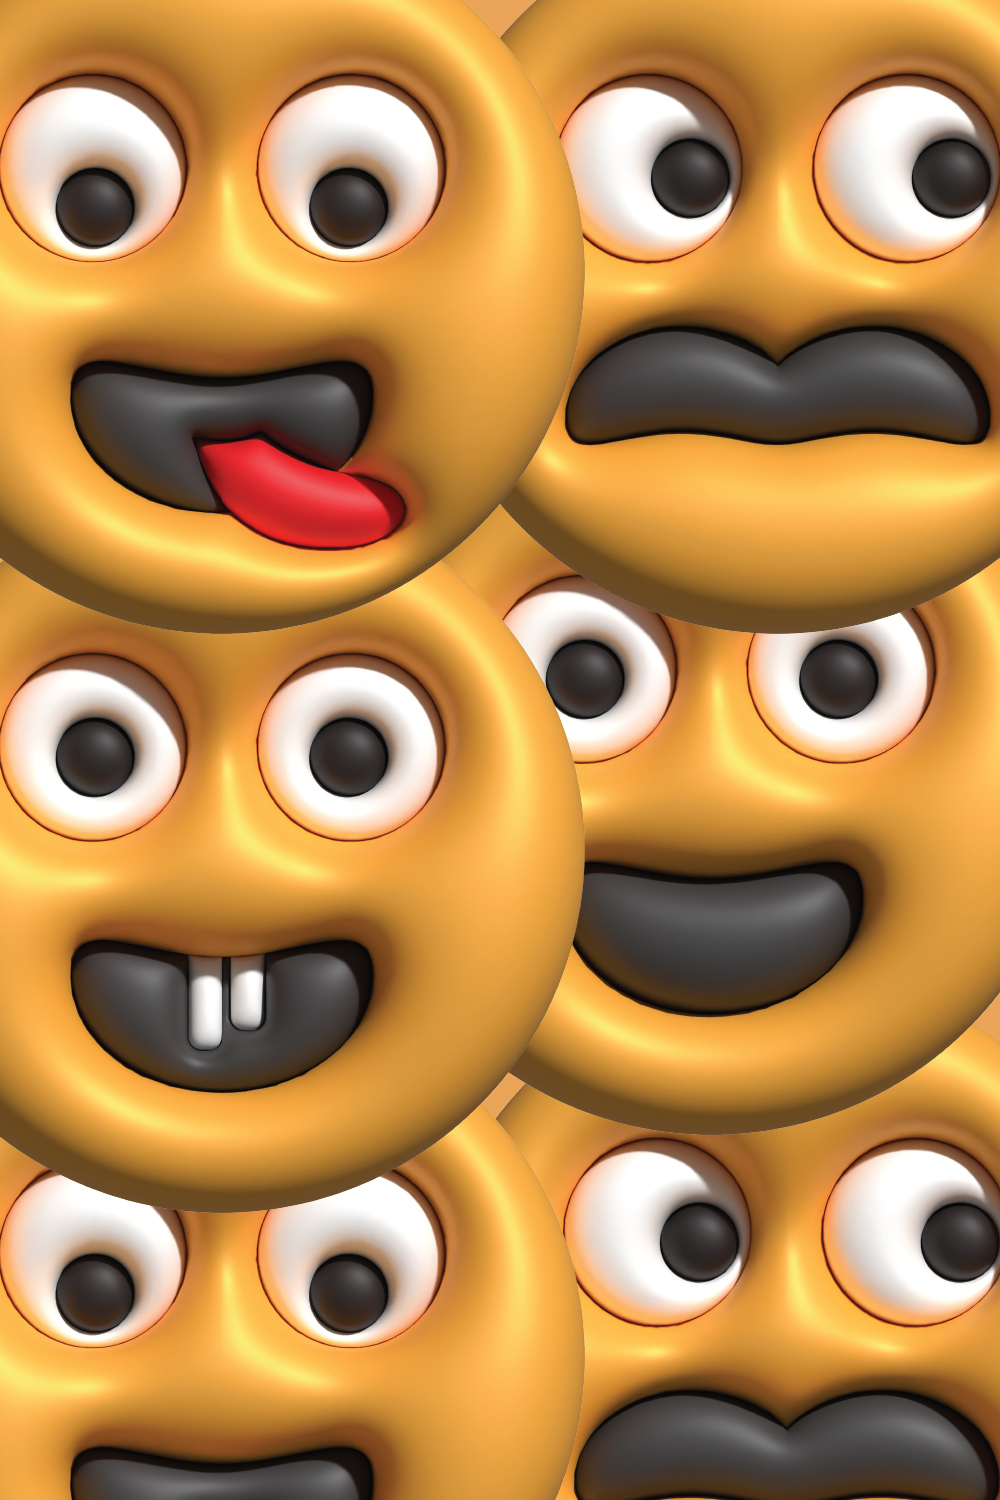 Bunch of emoticions with eyes and mouths.